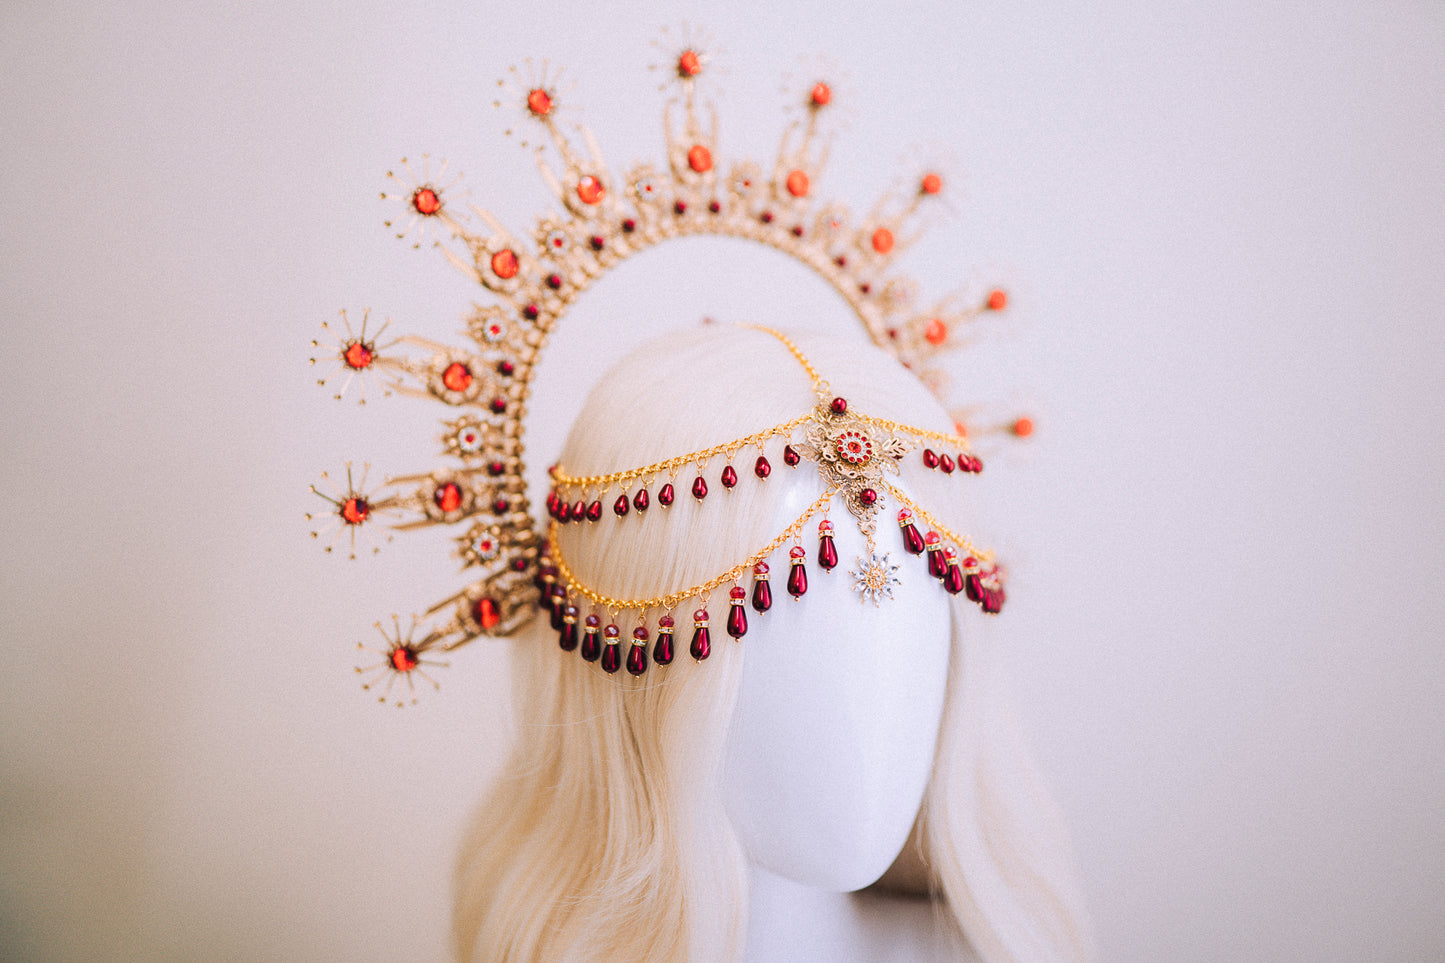 Gold Halo Crown